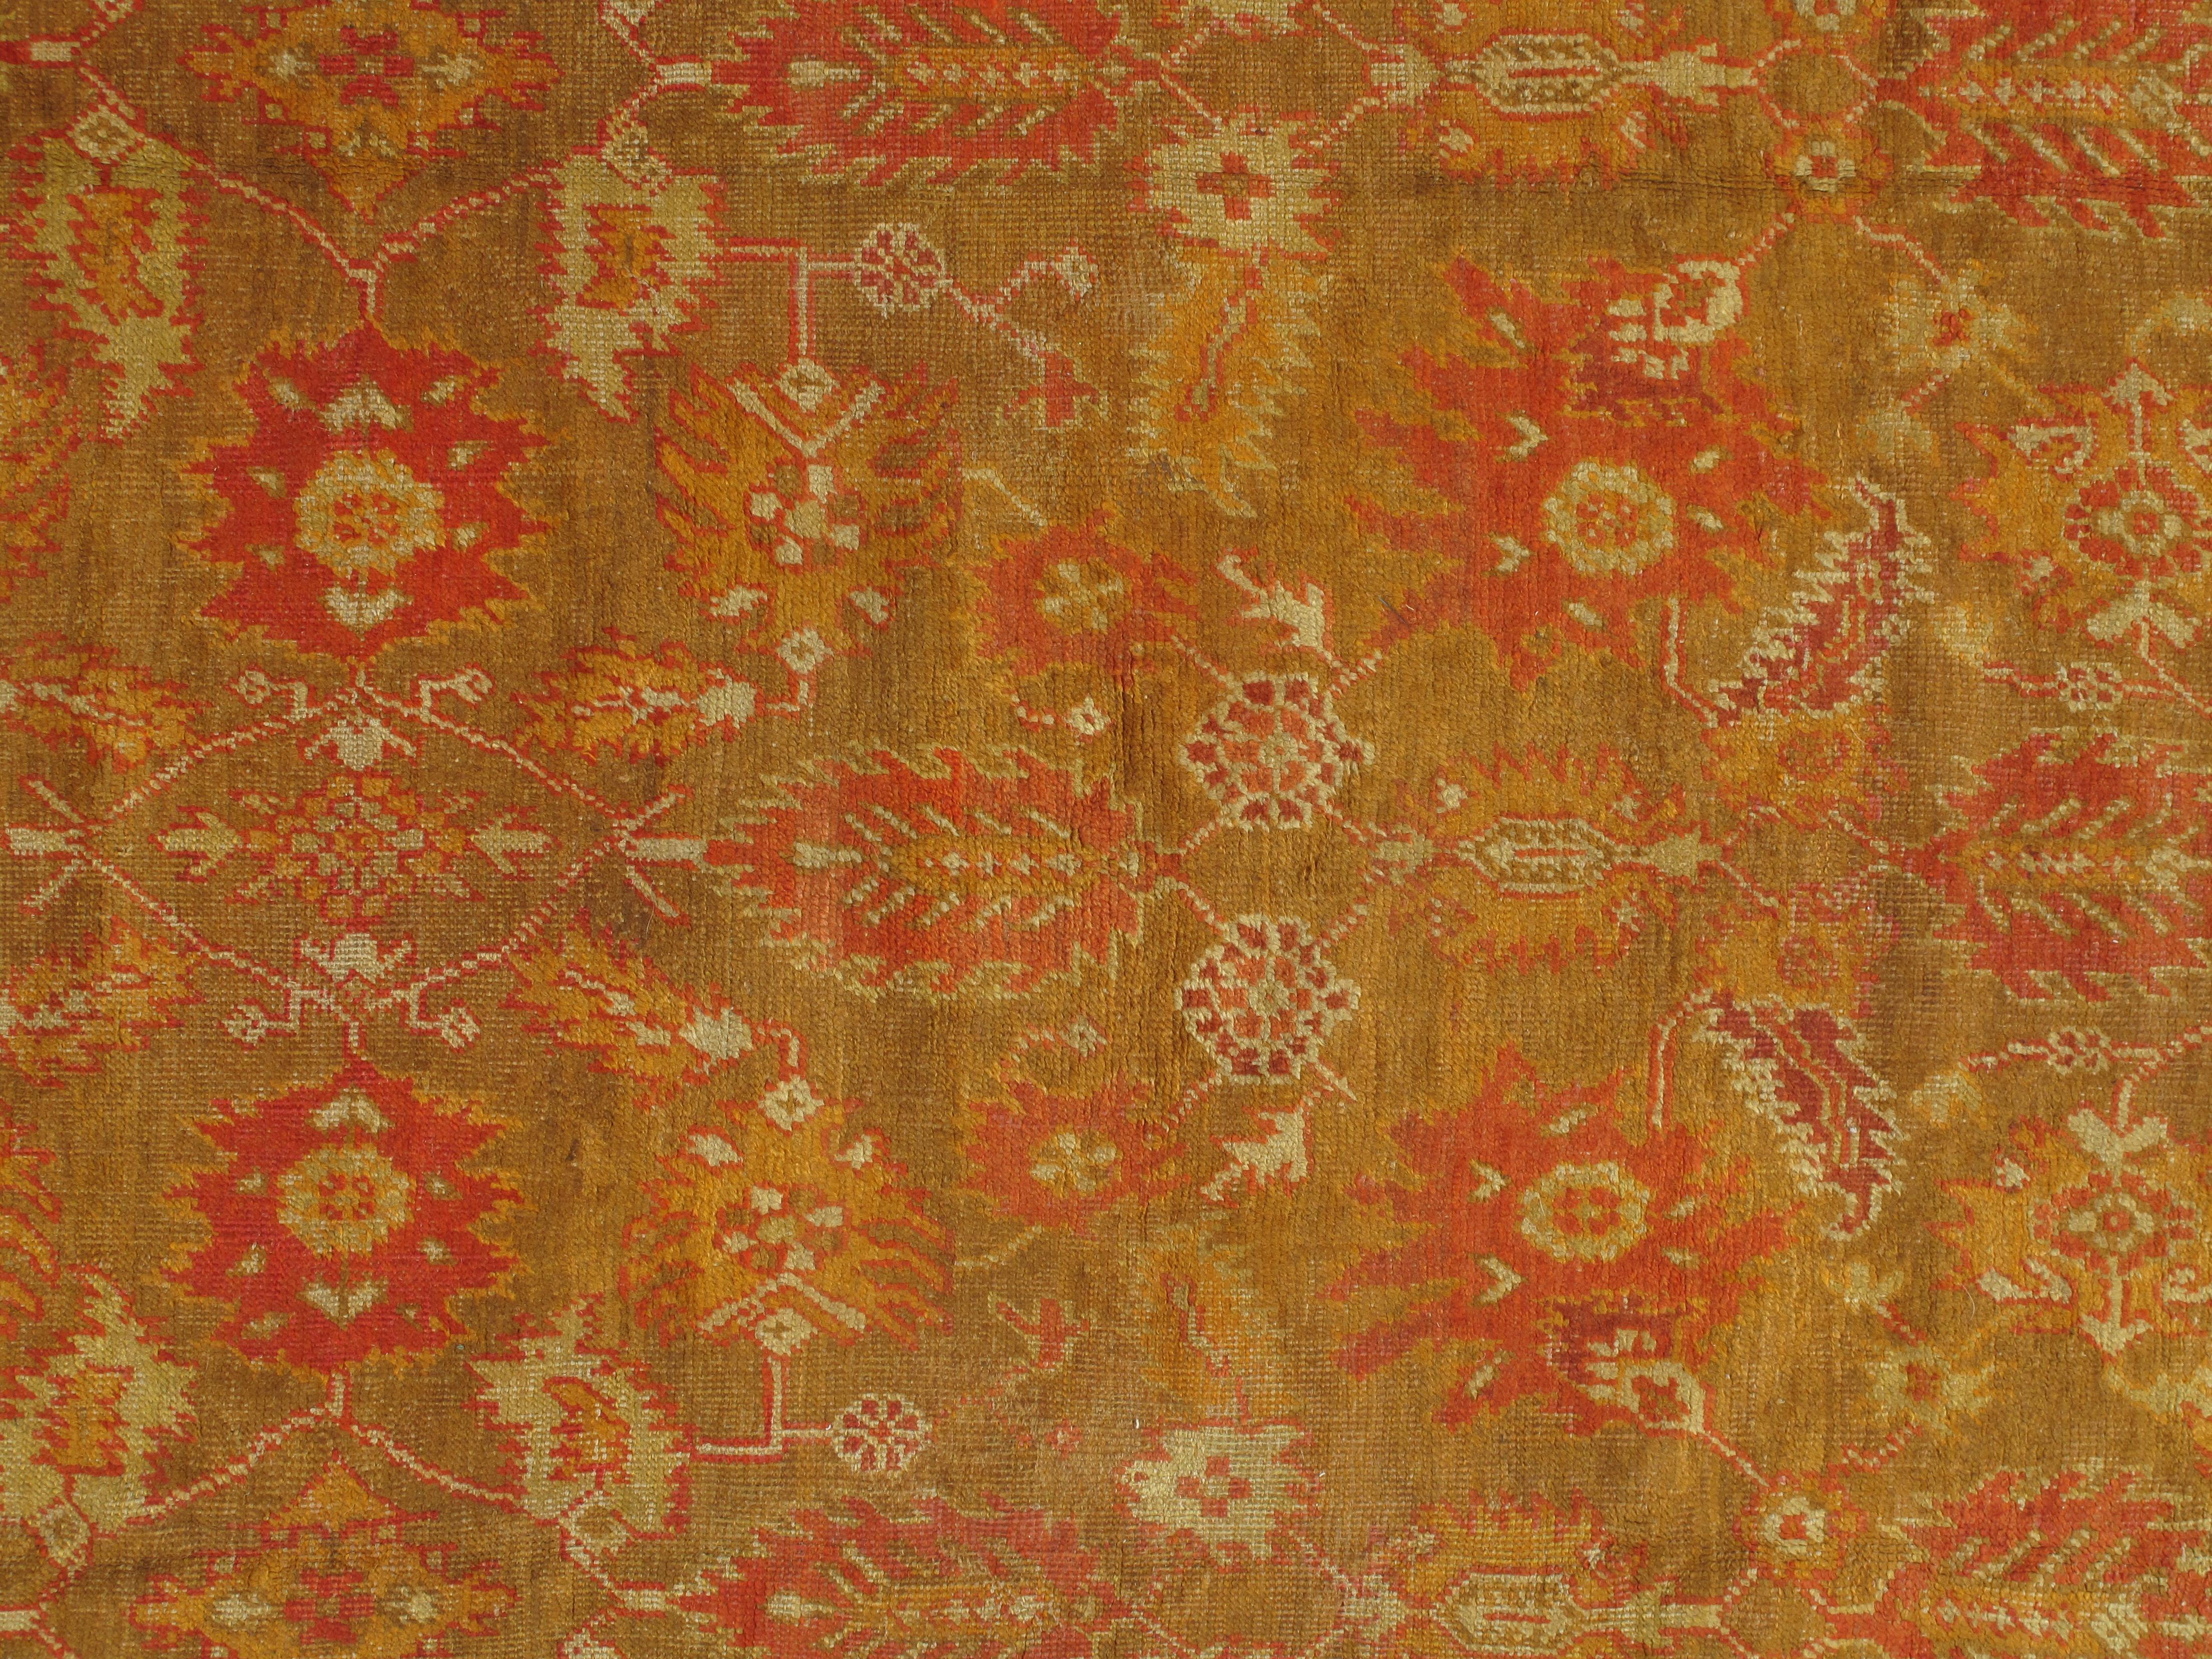 Turkish carpet from Oushak with a combination of soft colors having an all-over design. Finely woven, having the most superb wool found in the mountains of Anatolia. This is a fine example of an antique Oushak. 

Size: 9'5